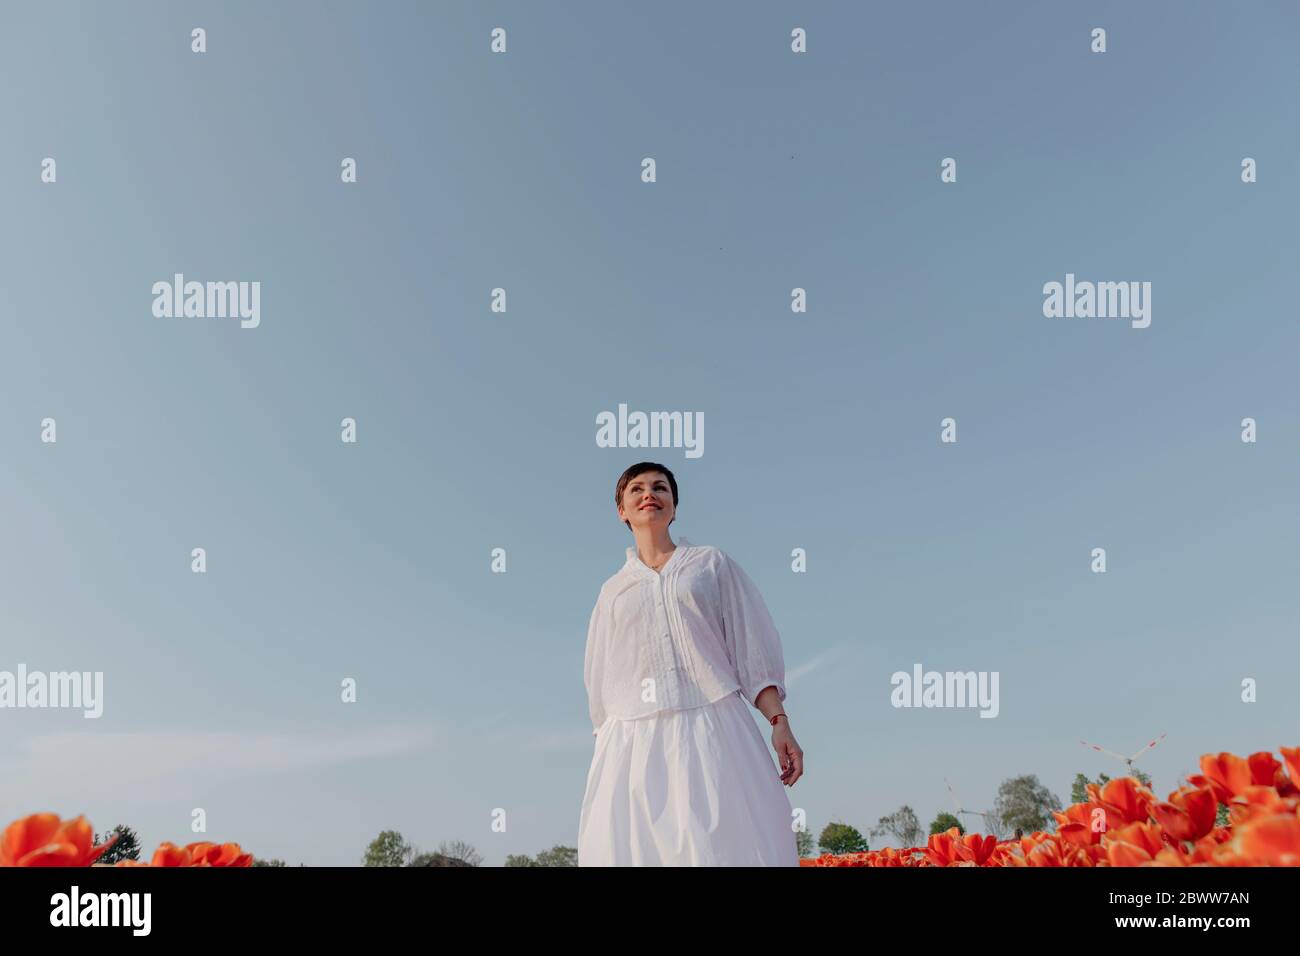 Portrait of smiling woman dressed in white standing tulip field Stock Photo